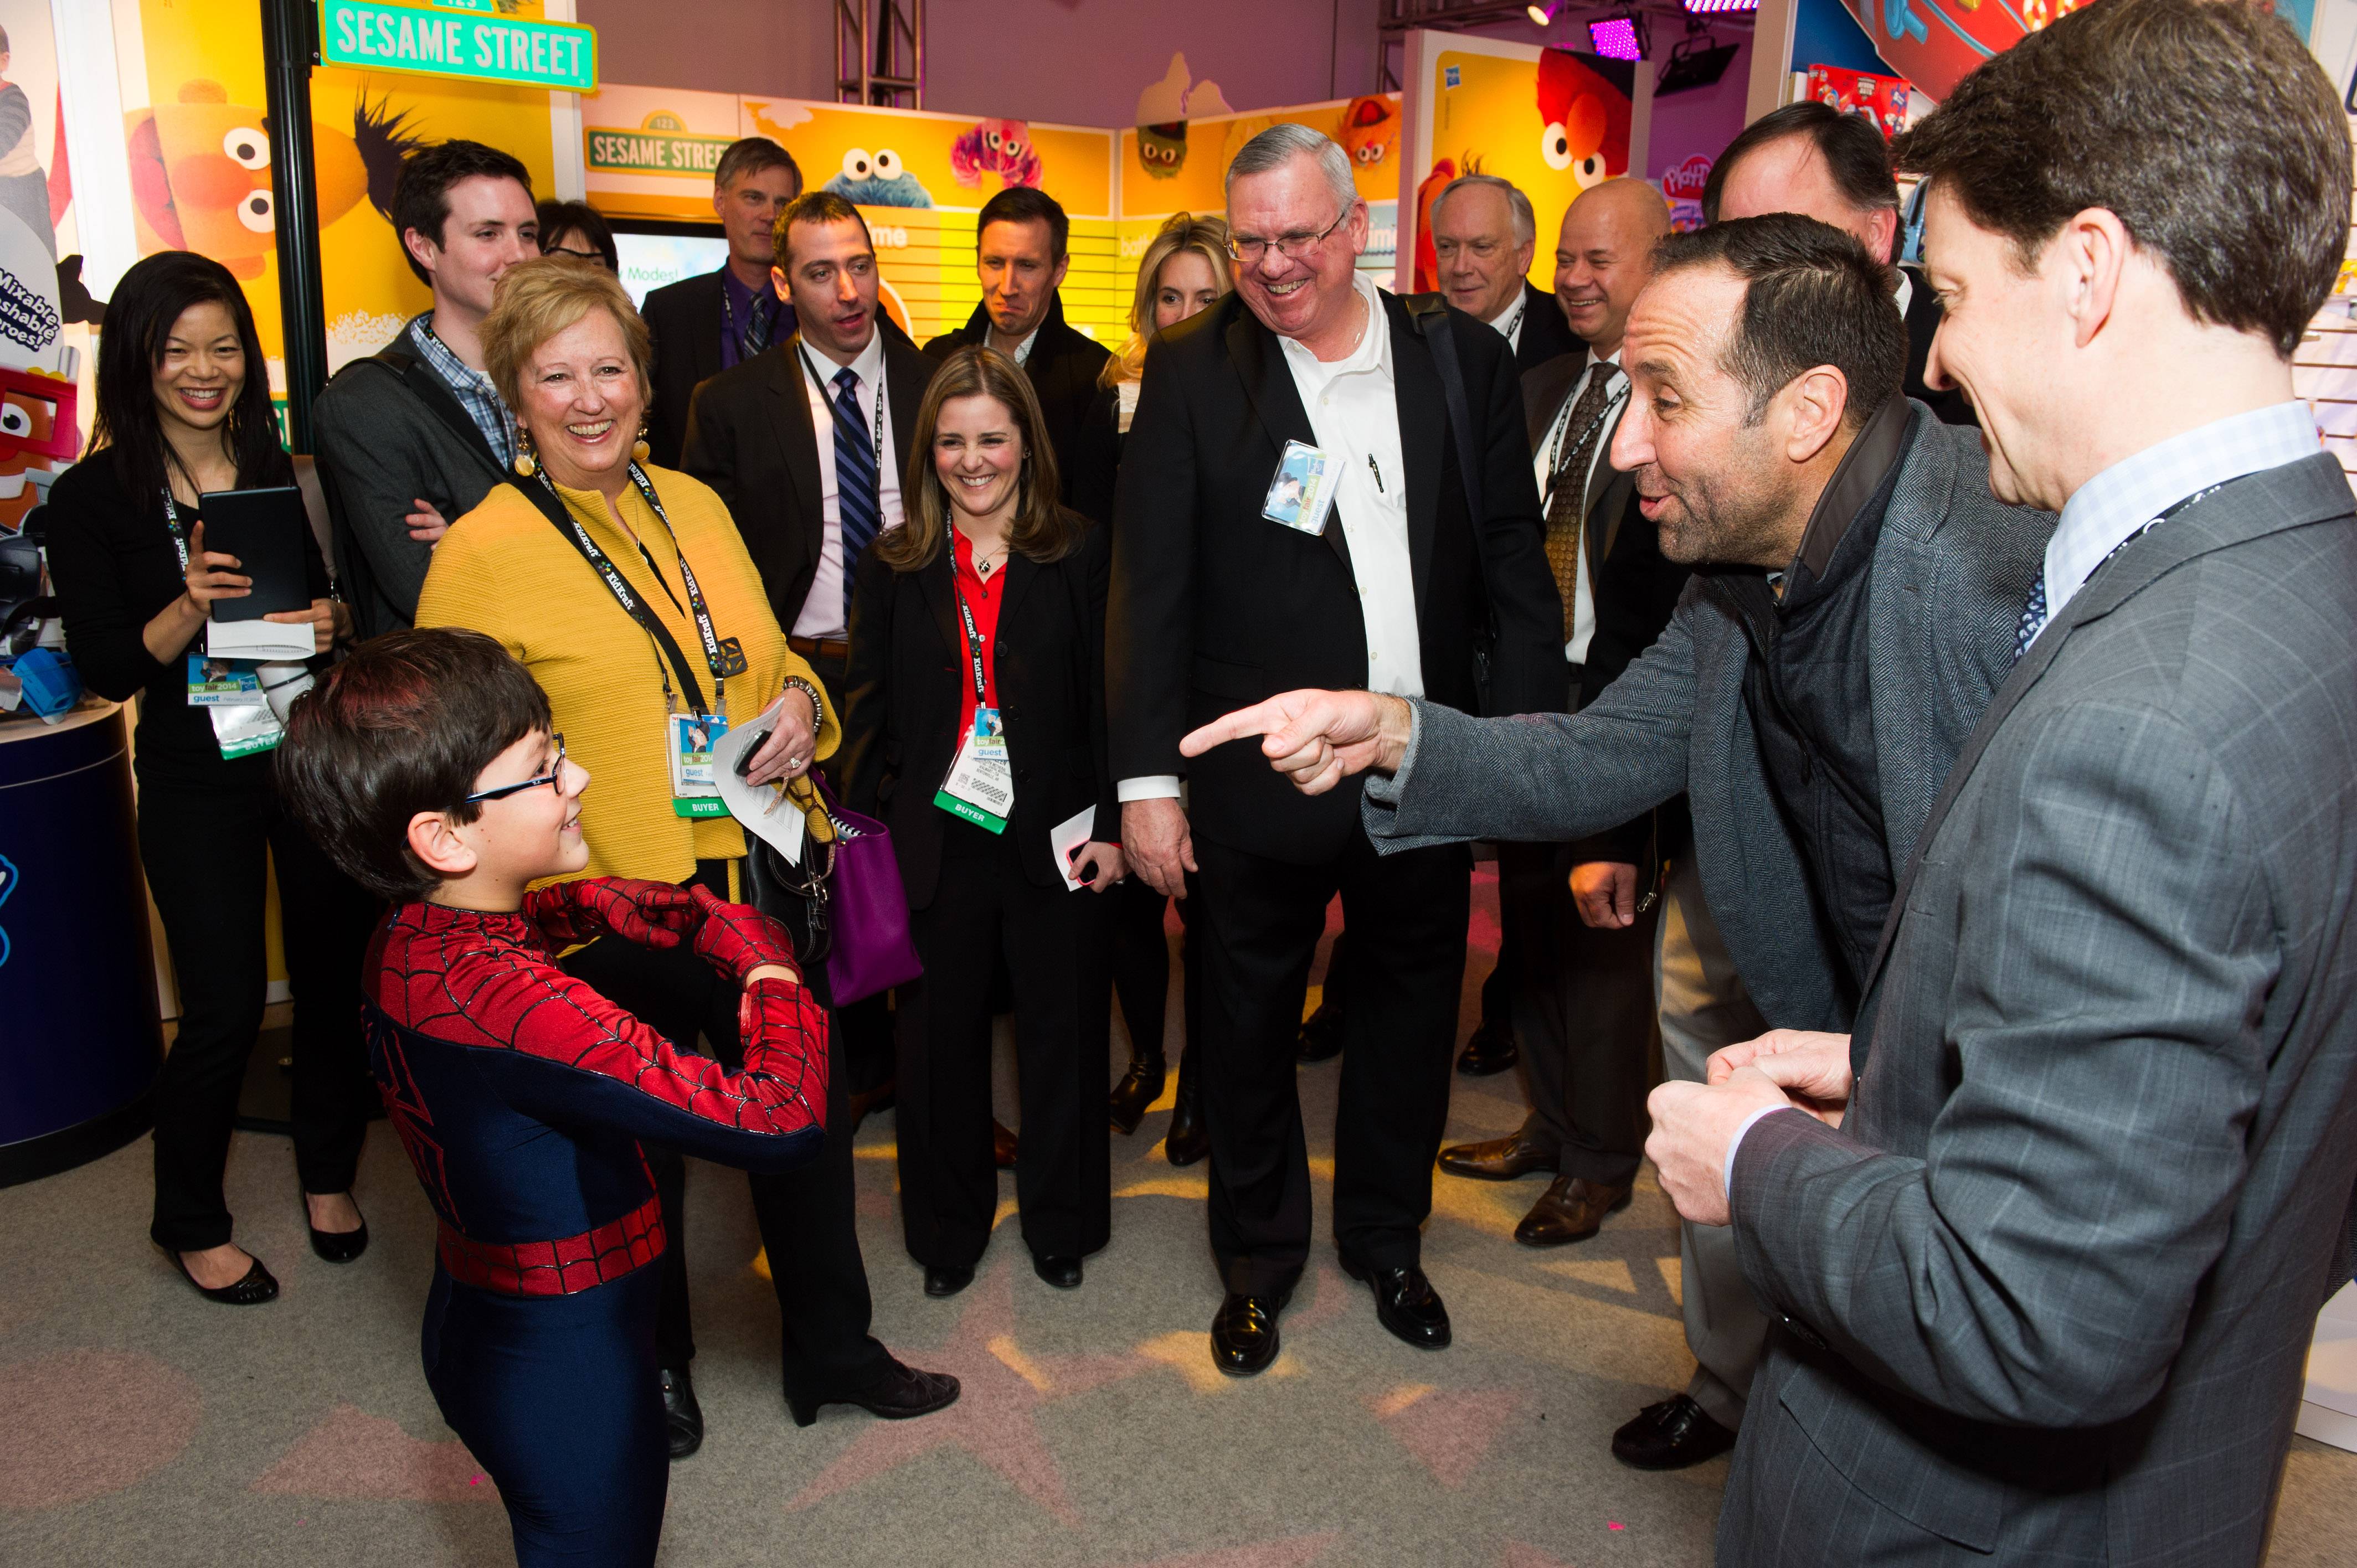 Jorge Vega invited as a special guest and charming toy industry executives at the Hasbro Toy Fair in New York City.